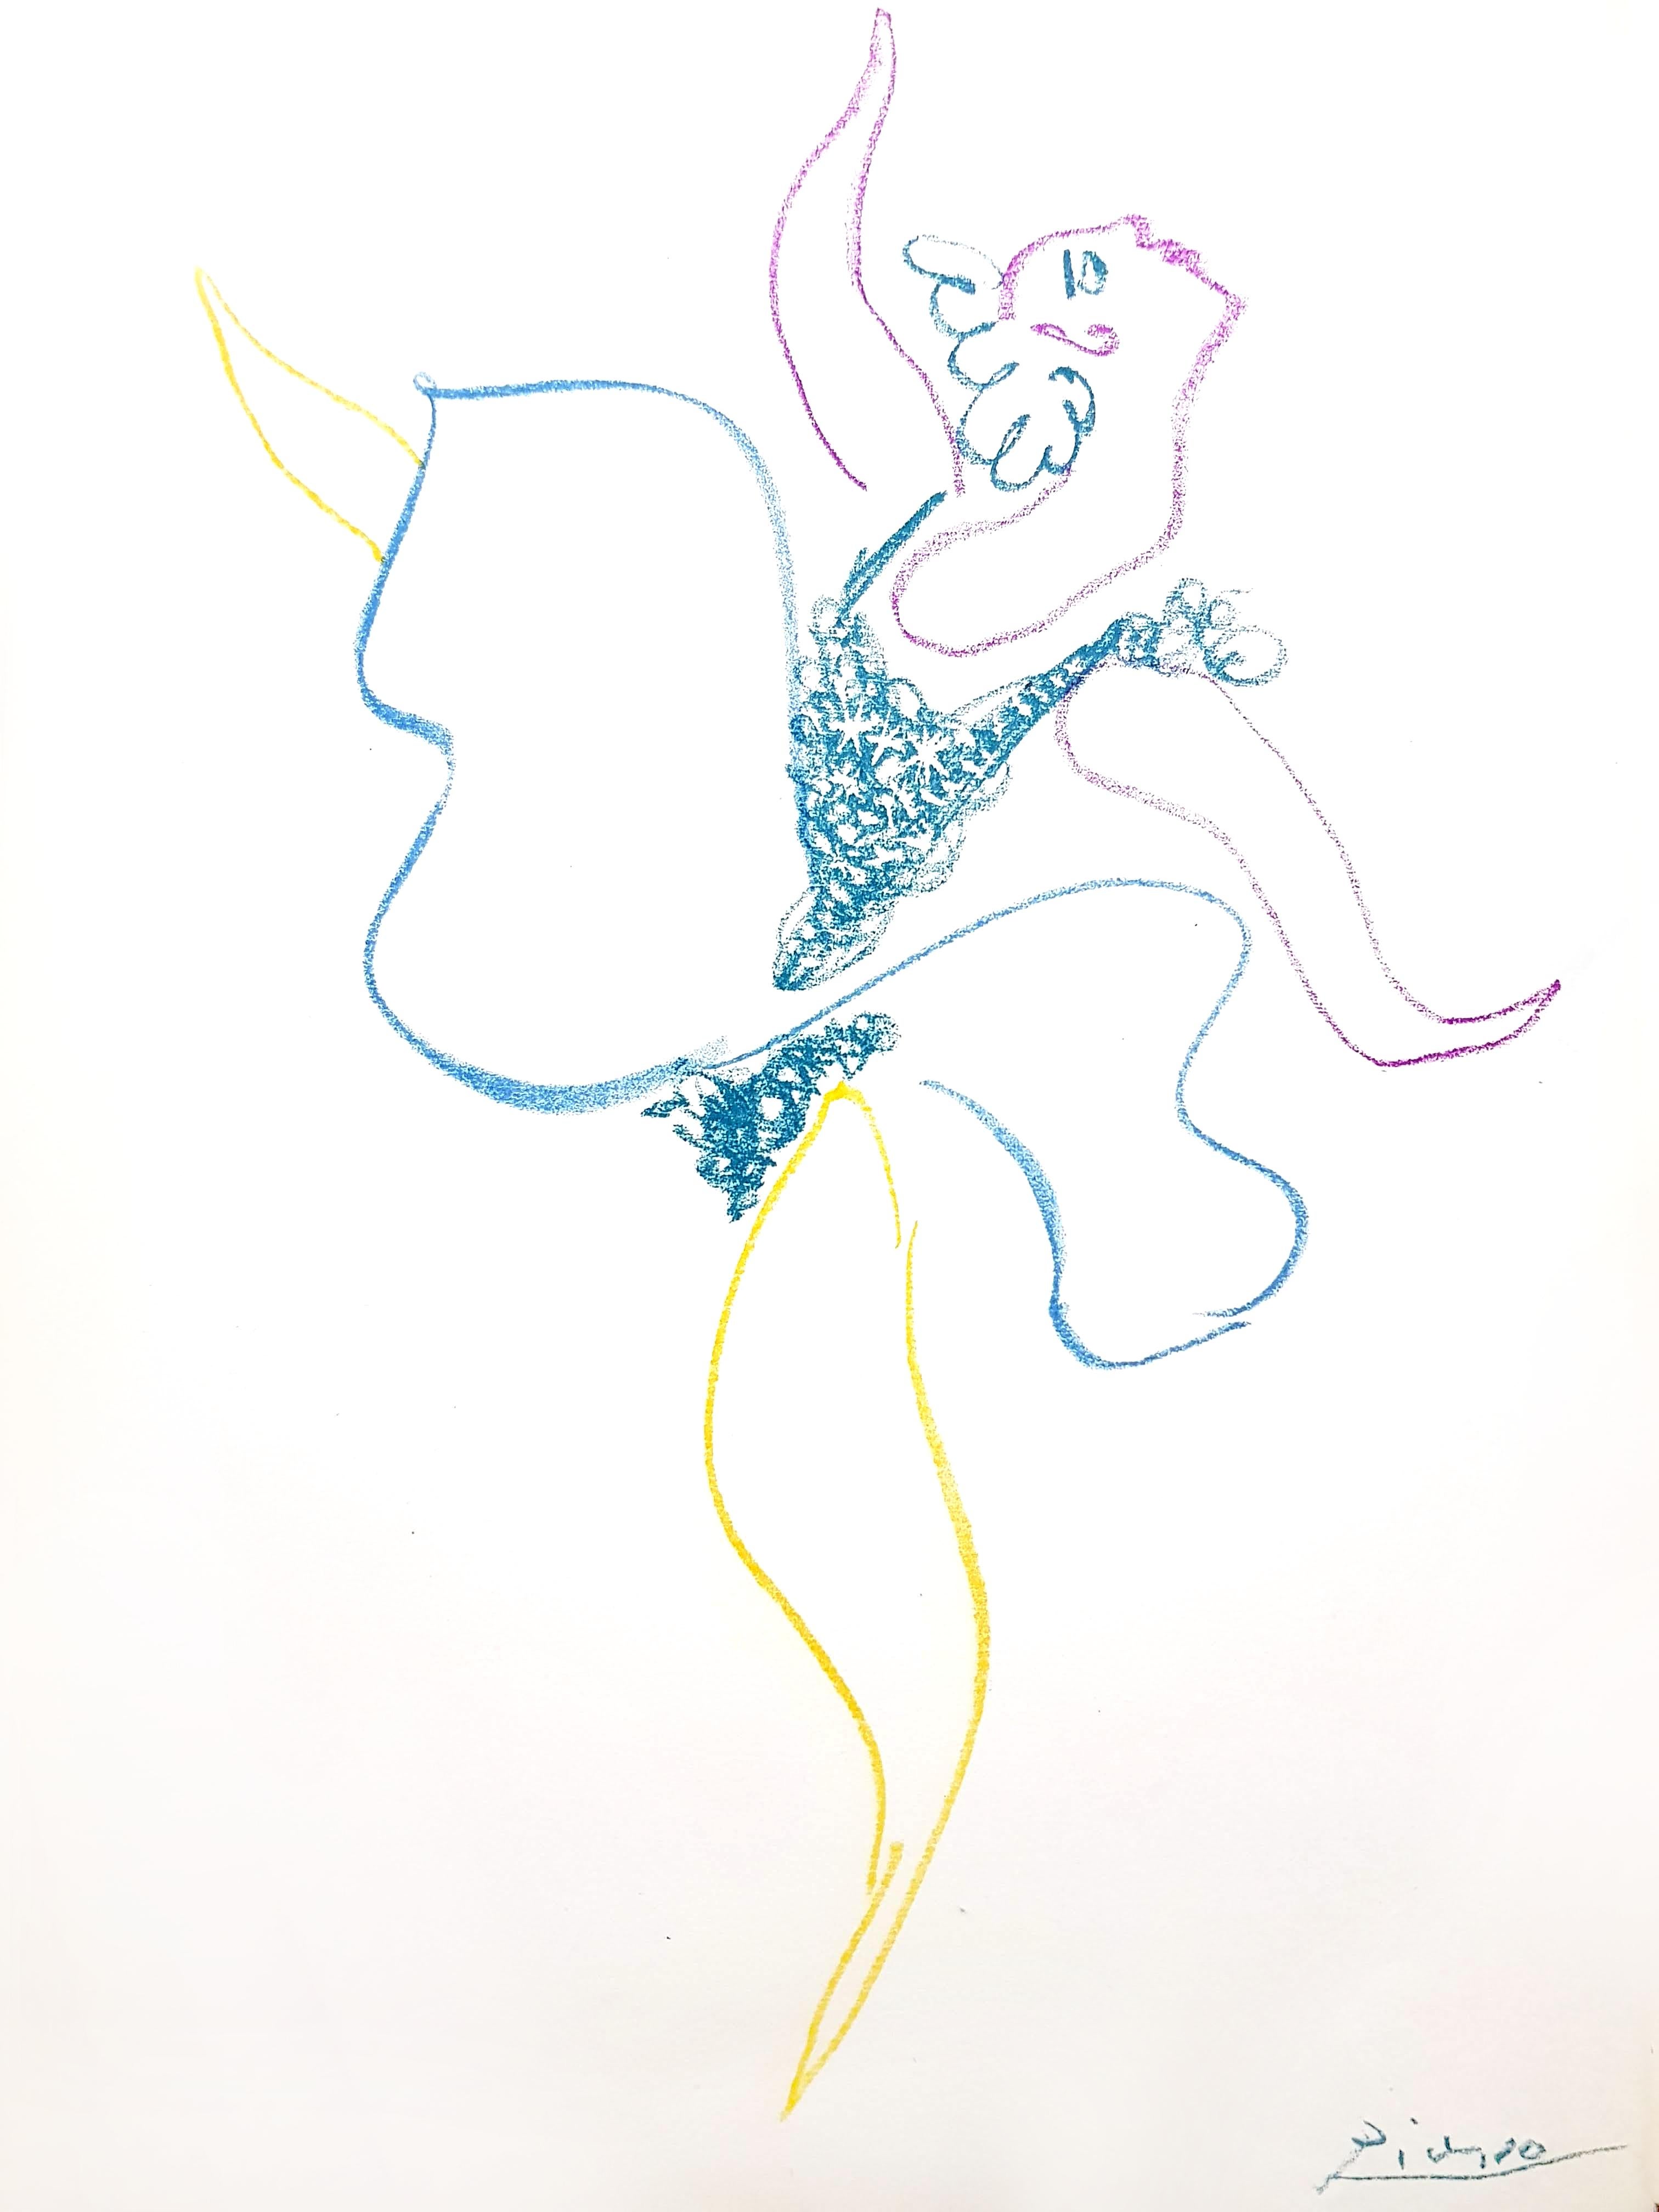 Pablo Picasso - Original Lithograph
Title: The Ballet Dancer 
Dimensions: 32 x 24 cm
1954
Reference: Bloch 767
Frontispiece for the book "Le Ballet" (Paris: Editions Hachet, 1954) by Boris Kochno
Edition of 1000
Printed signature